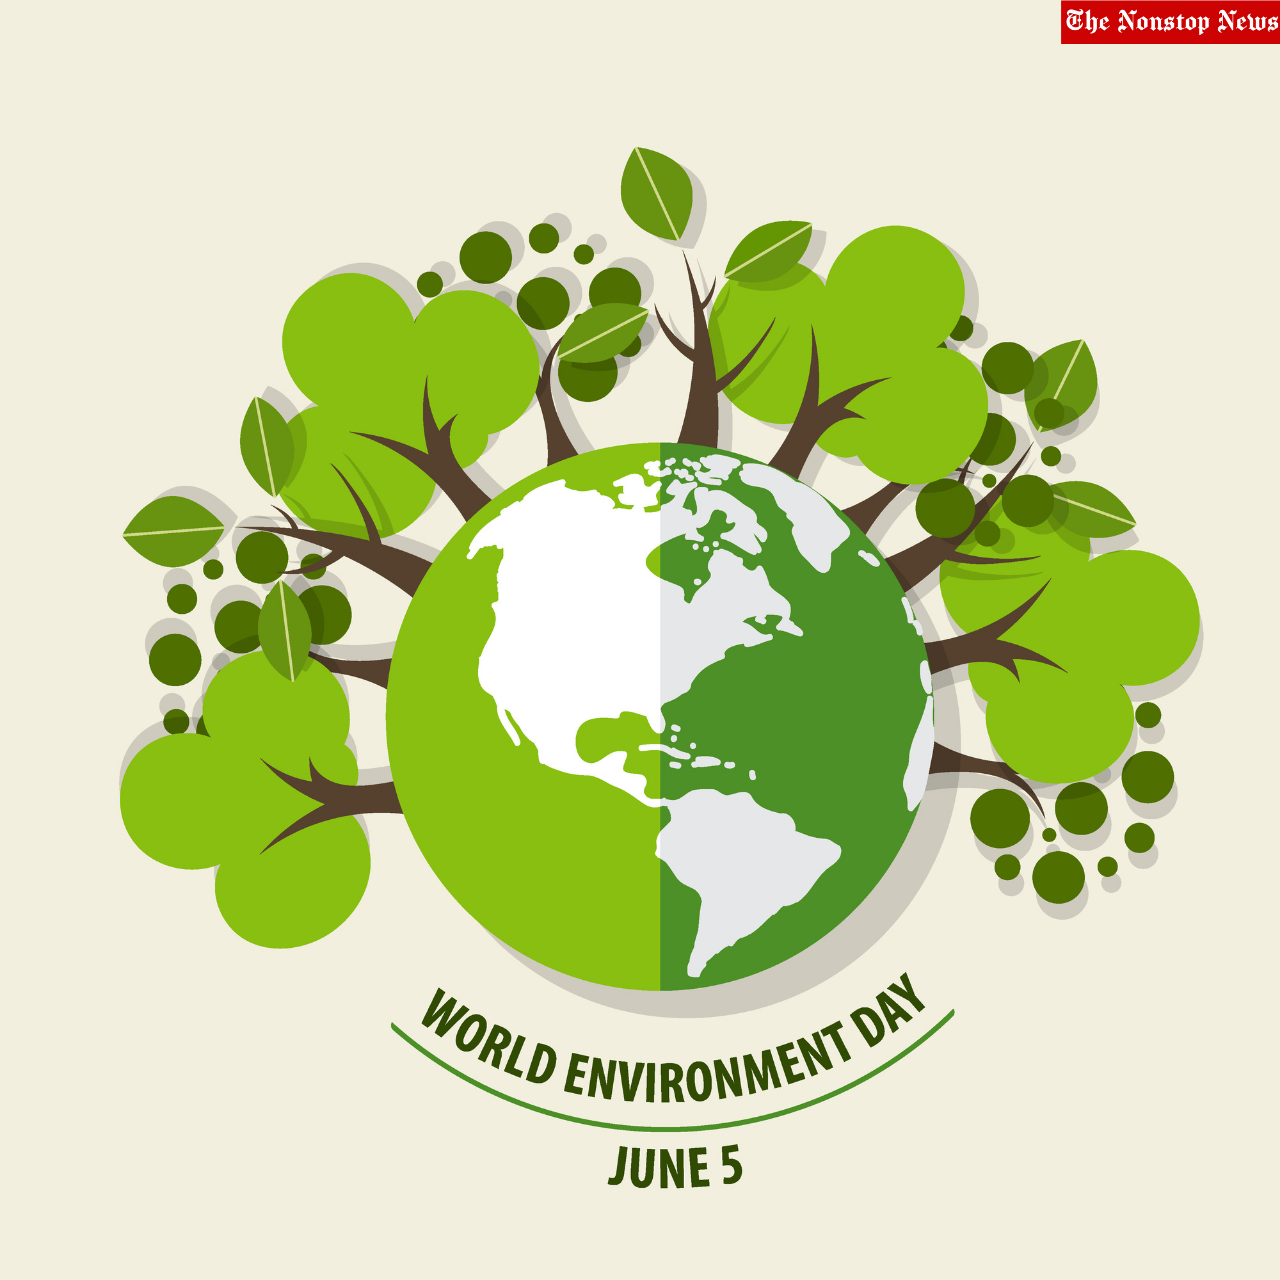 World Environment Day 2022: Best Instagram Captions, Facebook Greetings, WhatsApp Status, Twitter Quotes To Share